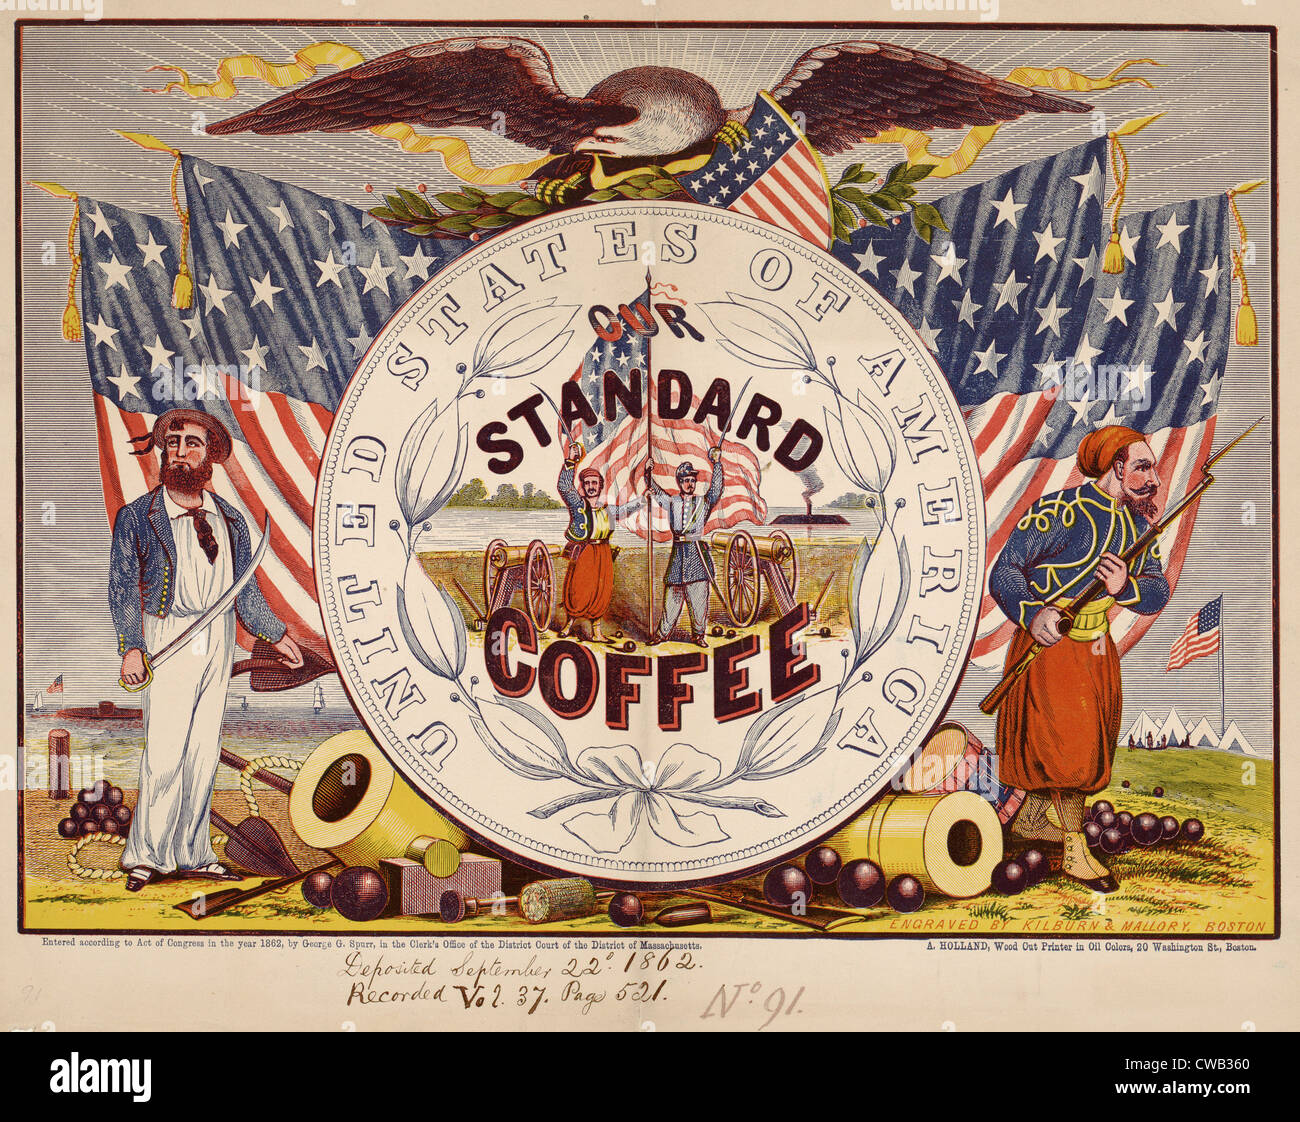 Coffee, United States of America, our standard coffee, illustration with Zouaves, soldier, eagle and flags, circa 1863. Stock Photo